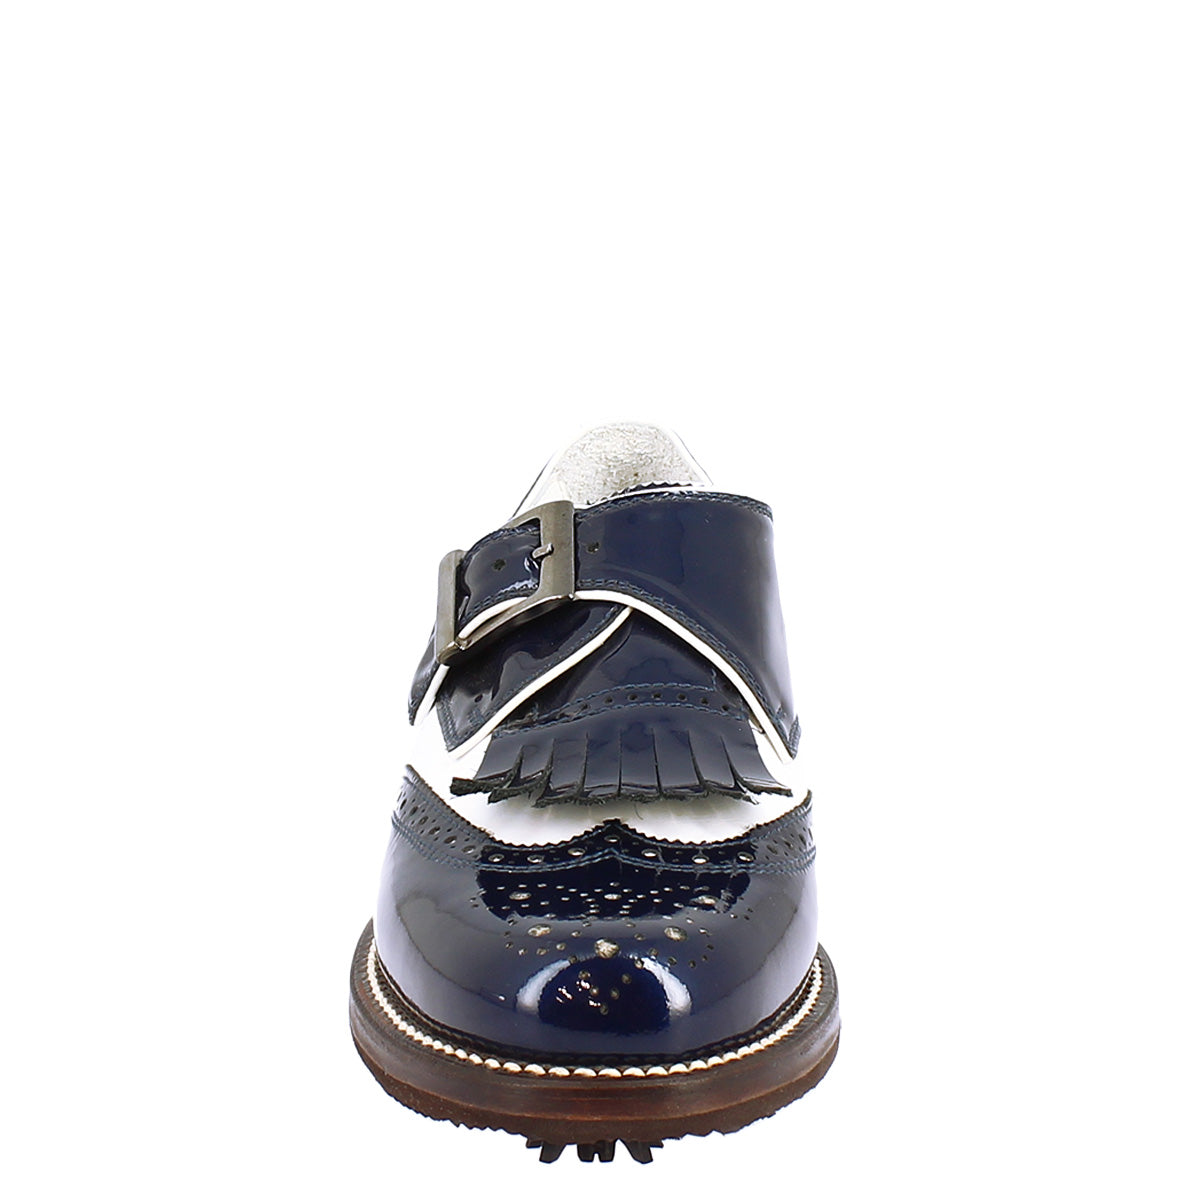 Women's buckle shoes in white leather and blue patent leather